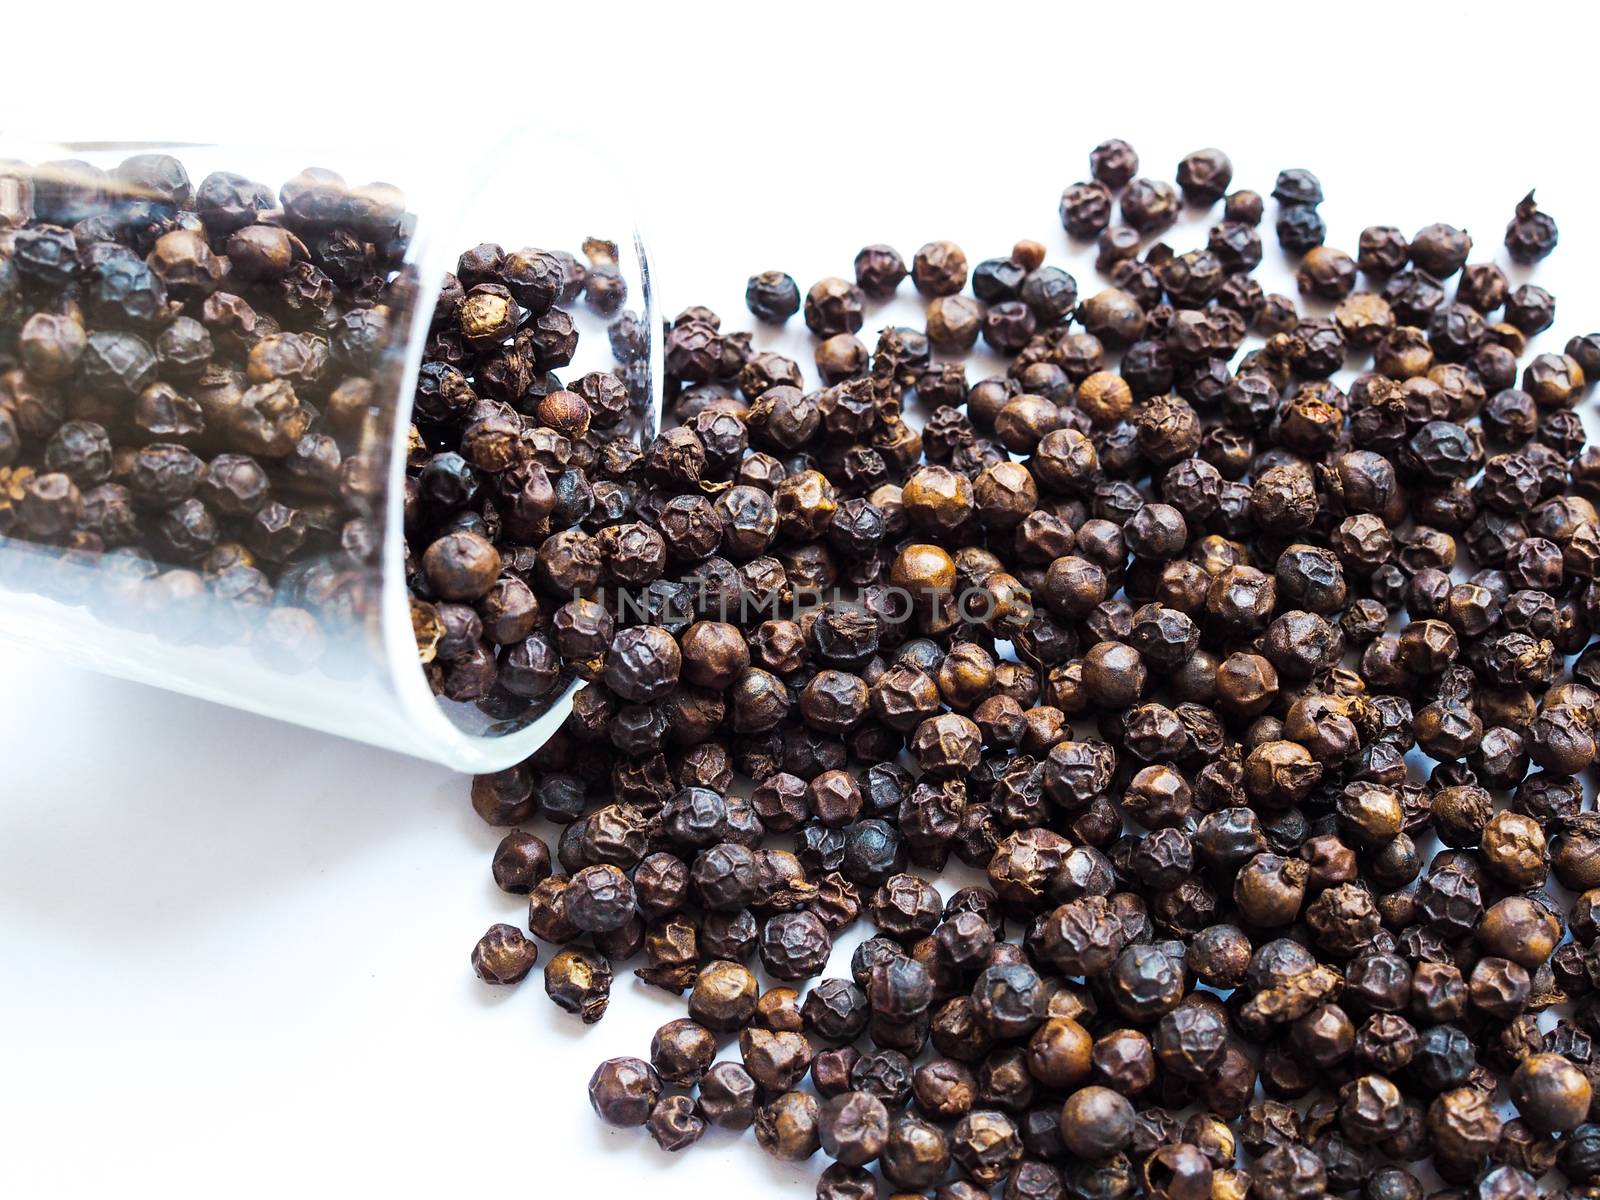 Dried black pepper seeds, peppercorn in a clear glass isolated on white background